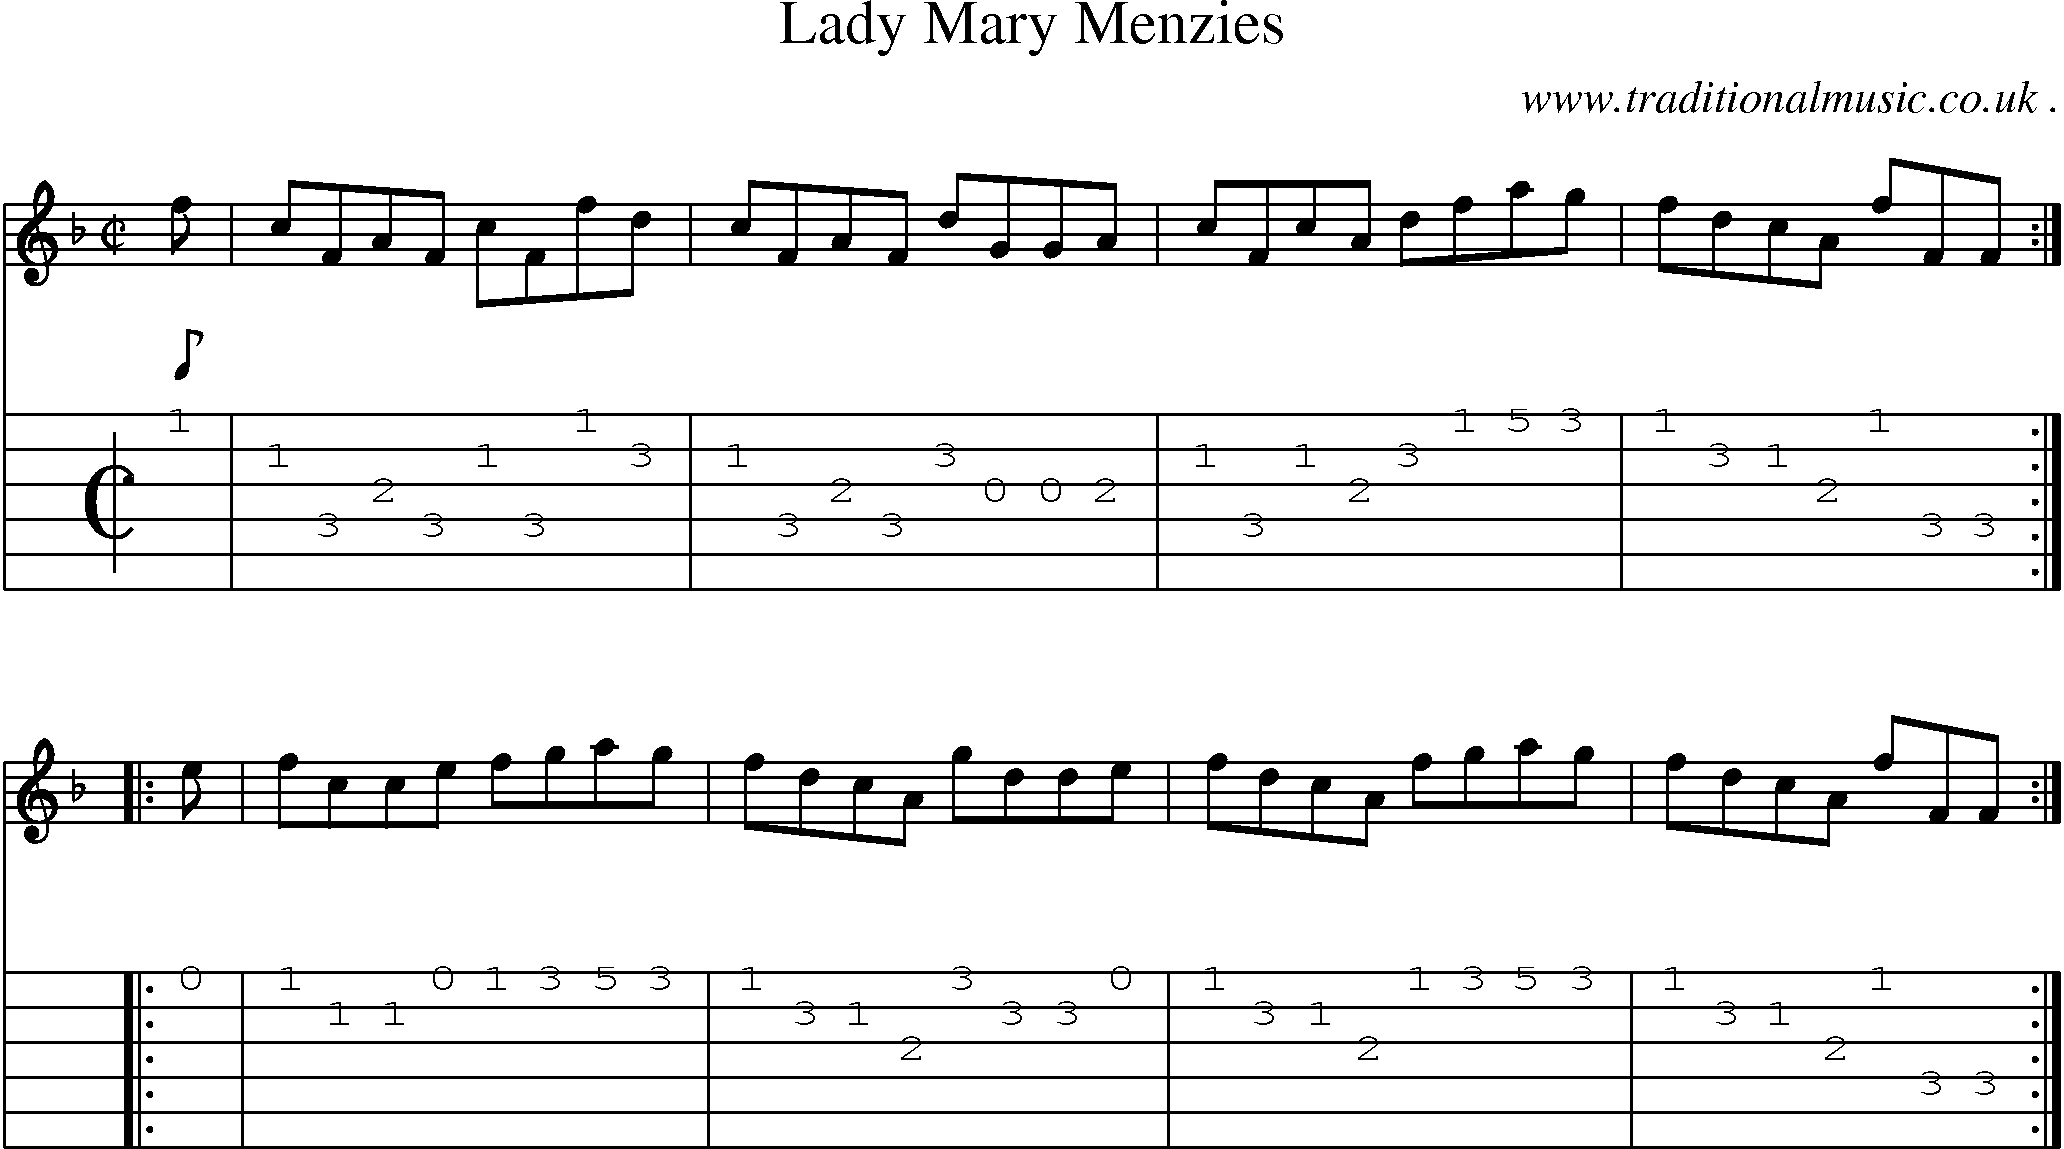 Sheet-music  score, Chords and Guitar Tabs for Lady Mary Menzies